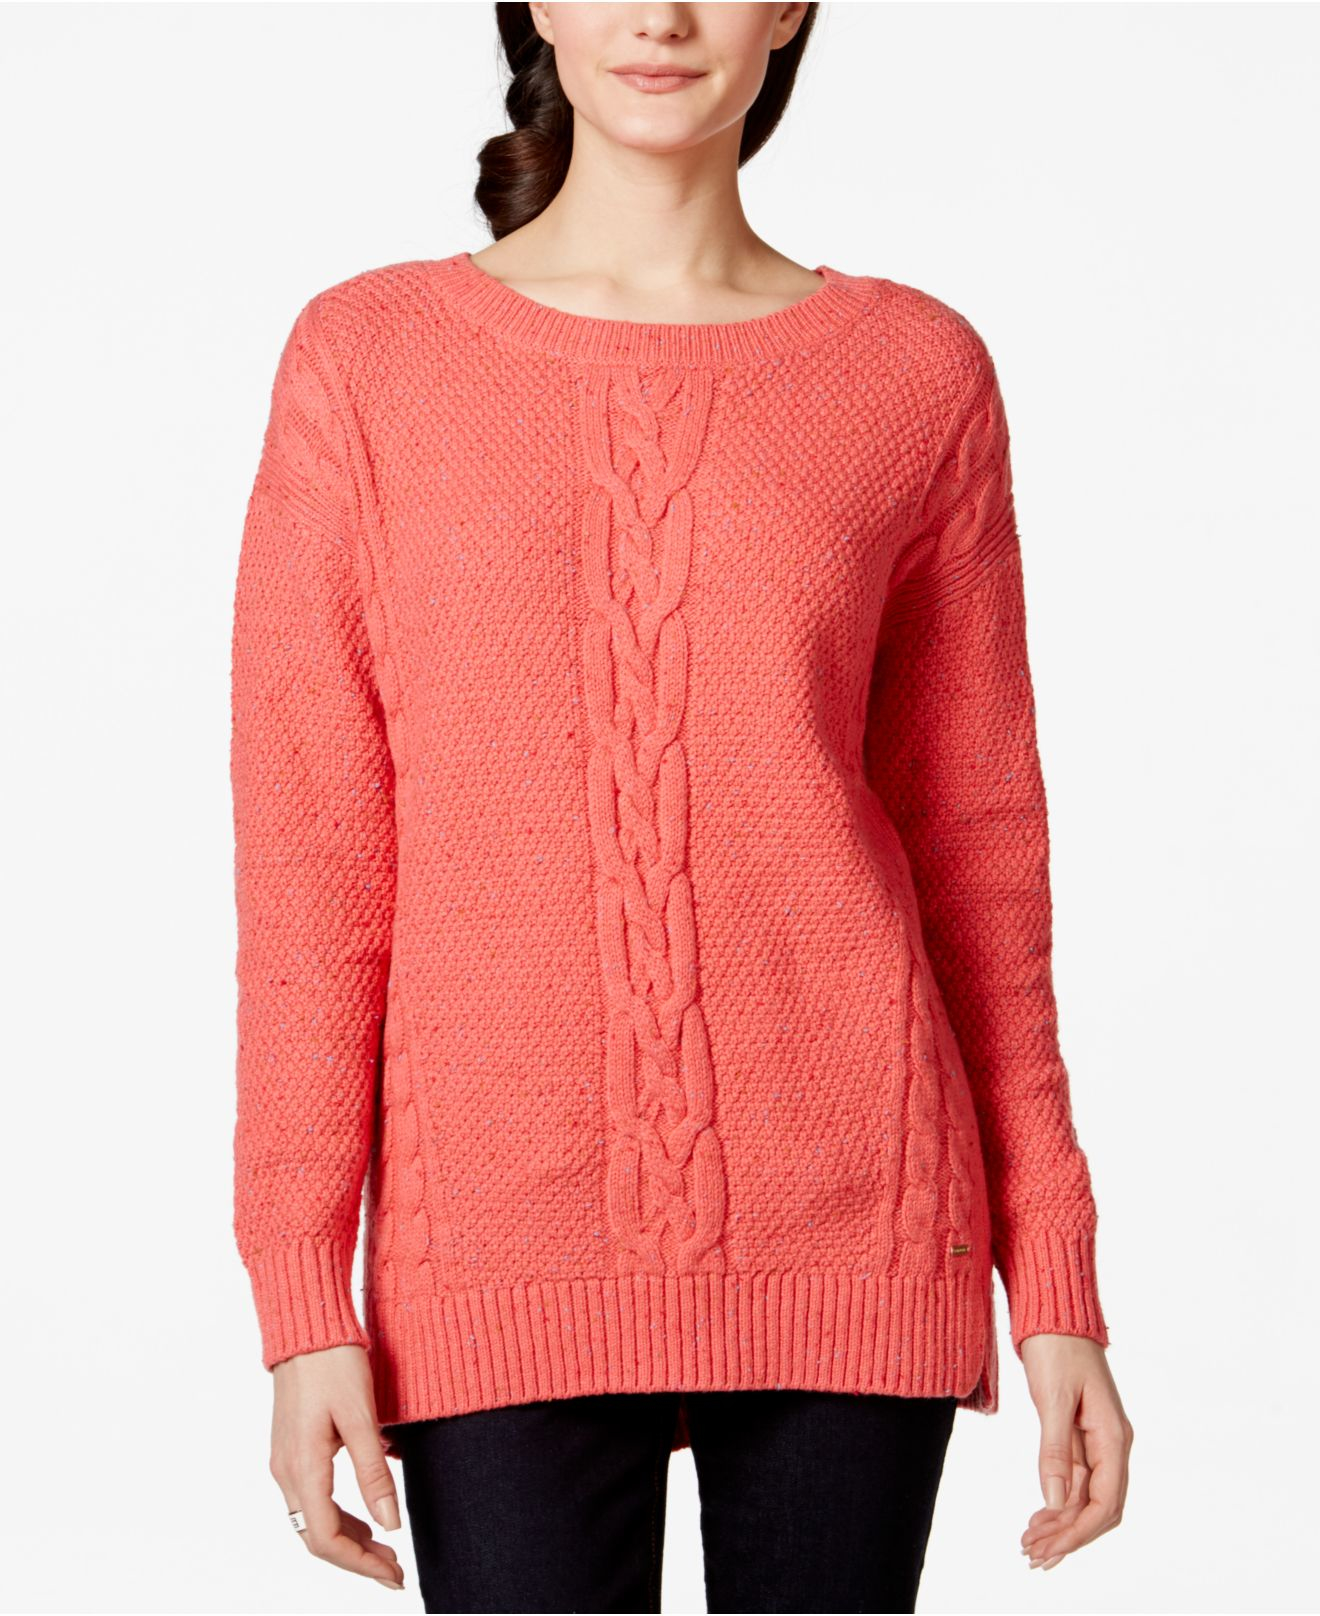 Lyst - Tommy Hilfiger Mara Long-sleeve Cable-knit Sweater in Pink